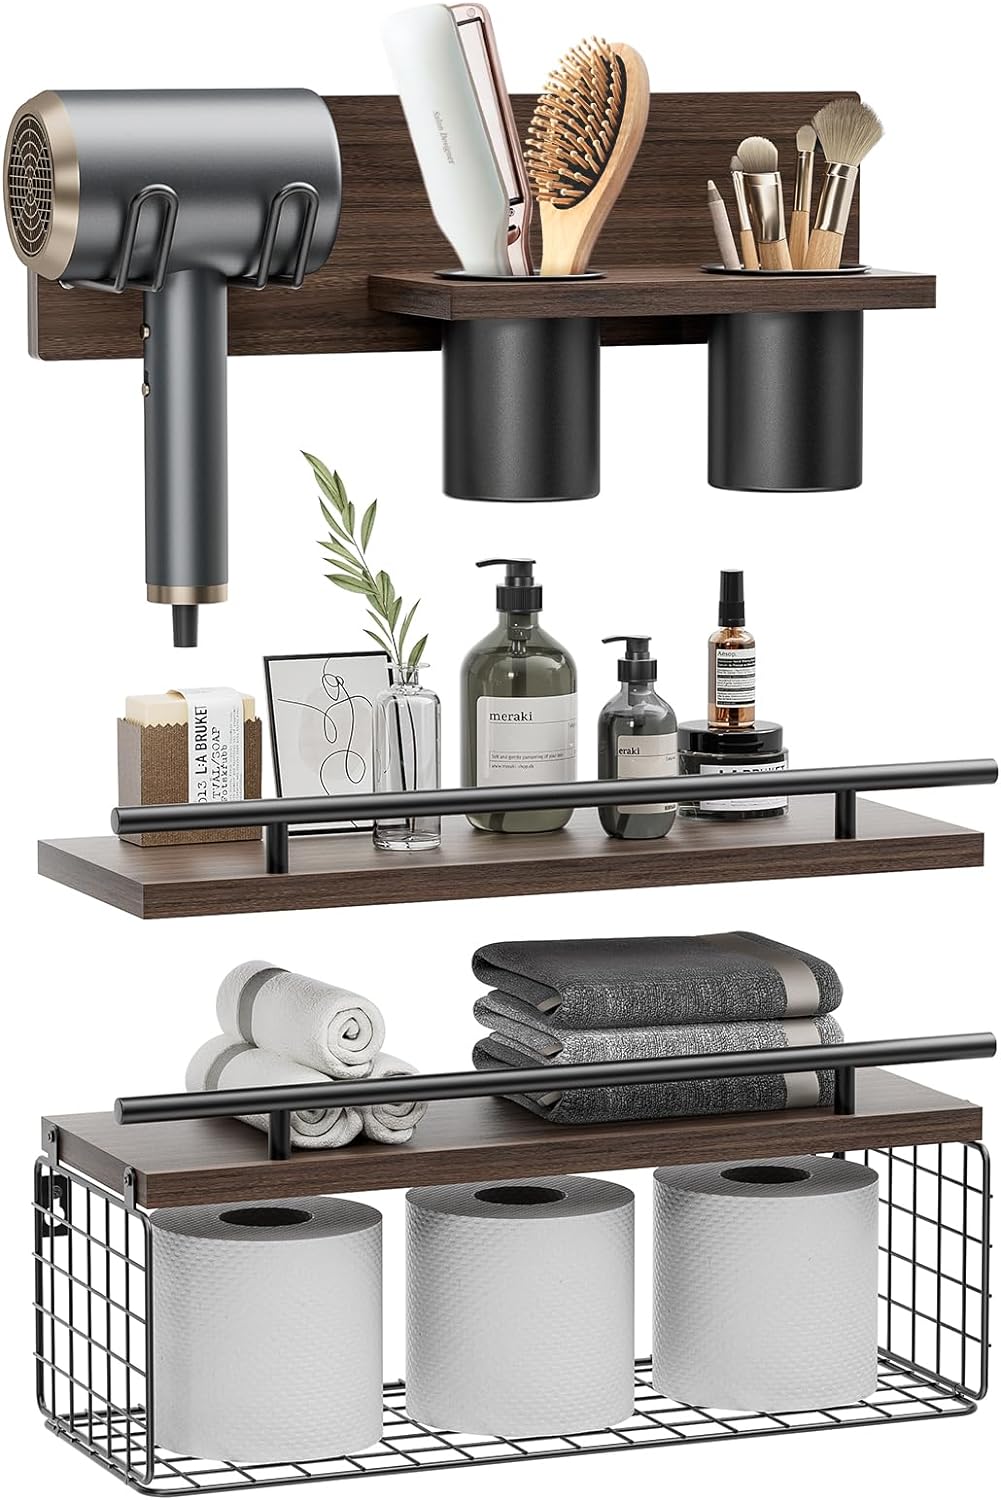 RoleDes Bathroom Floating Shelves with Hair Dryer Holder - Wall Mounted